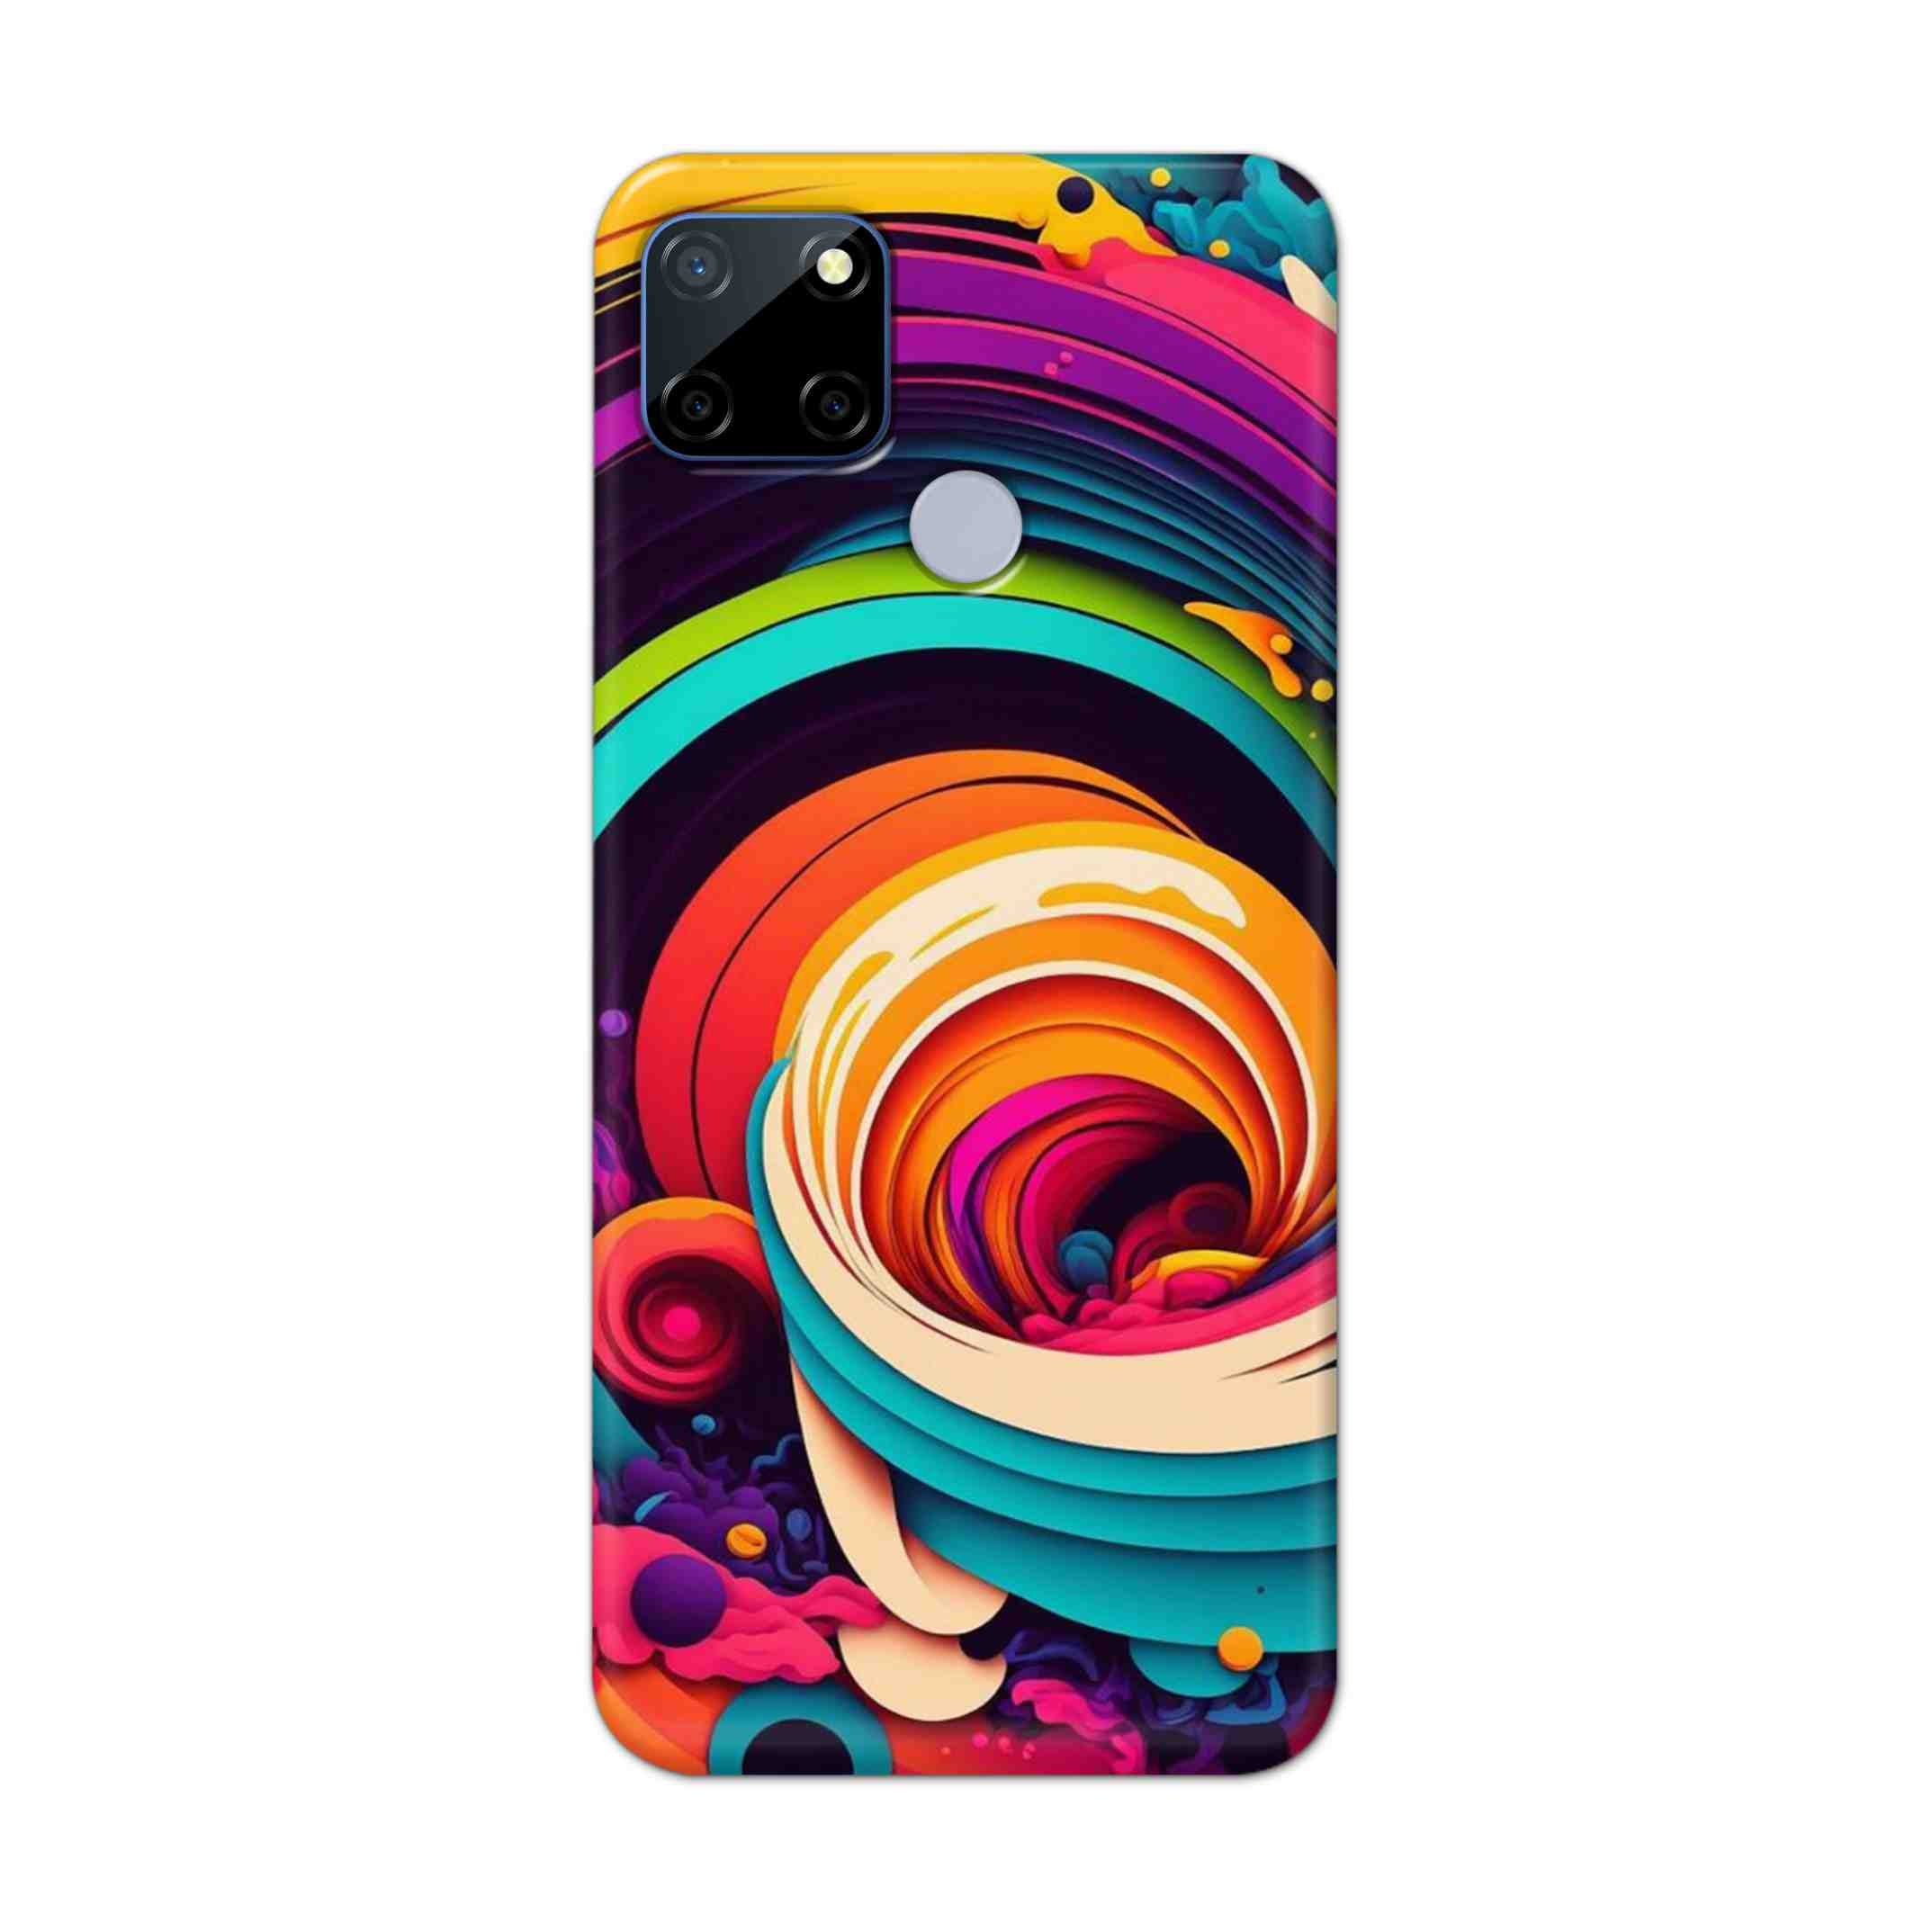 Buy Colour Circle Hard Back Mobile Phone Case Cover For Realme C12 Online